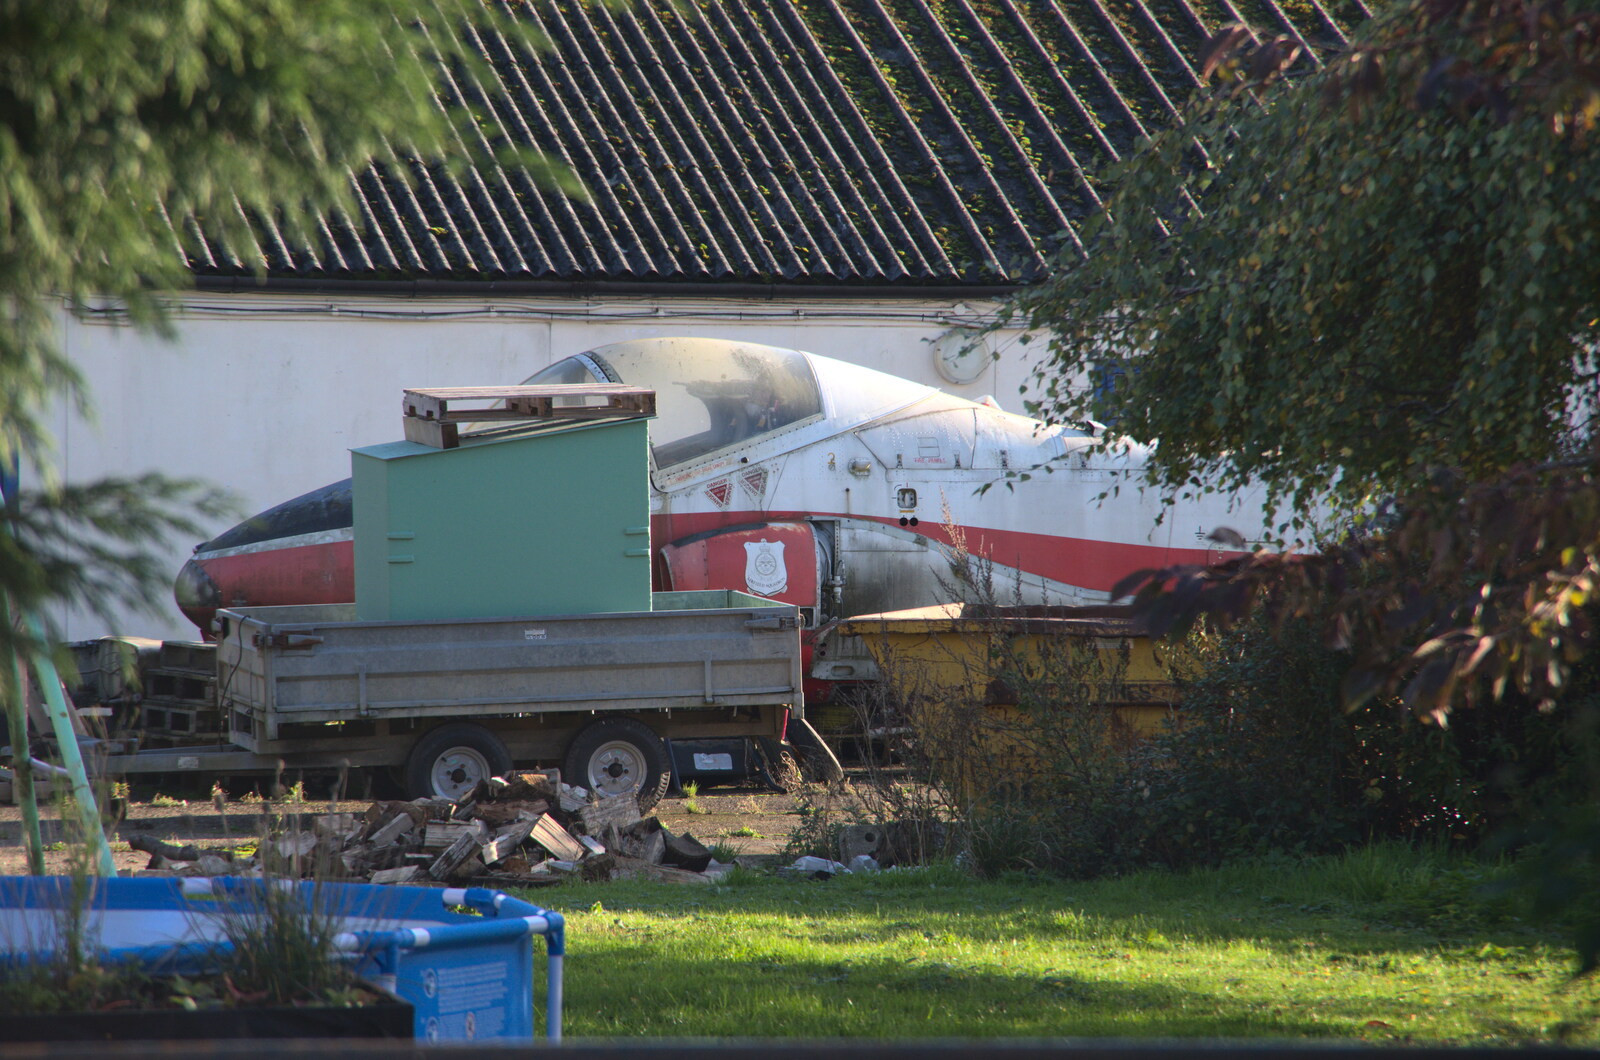 Some dude has a plane in their garden from A Walk Around the Avenue, Brome, Suffolk - 25th October 2020